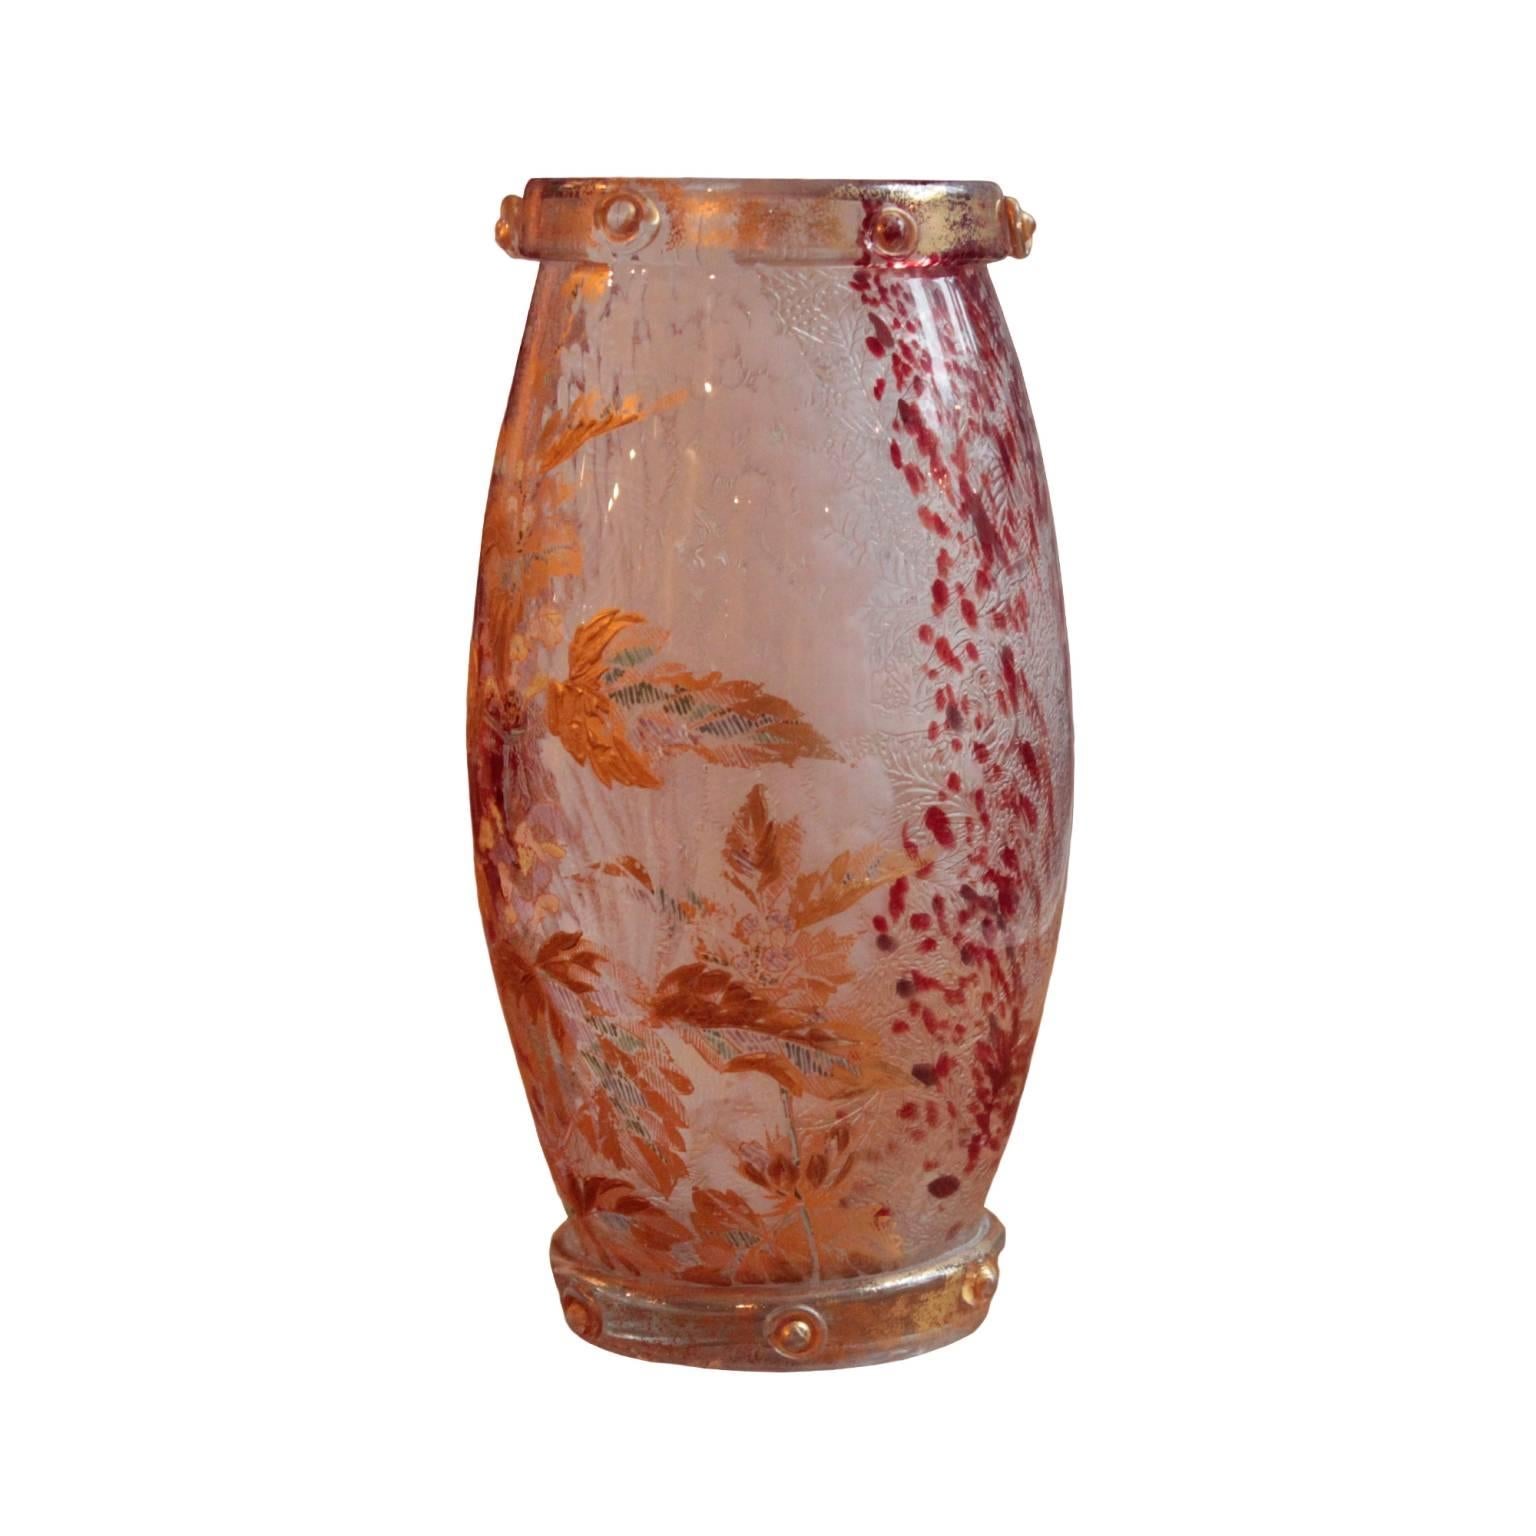 Of oblong shape; featuring dual glass-layered body, interior layer thoroughly etched with foliage motif and decorated with white and red hand applied paint, exterior layer decorated with hand-painted plant in gold, turquoise and blue. Top and base